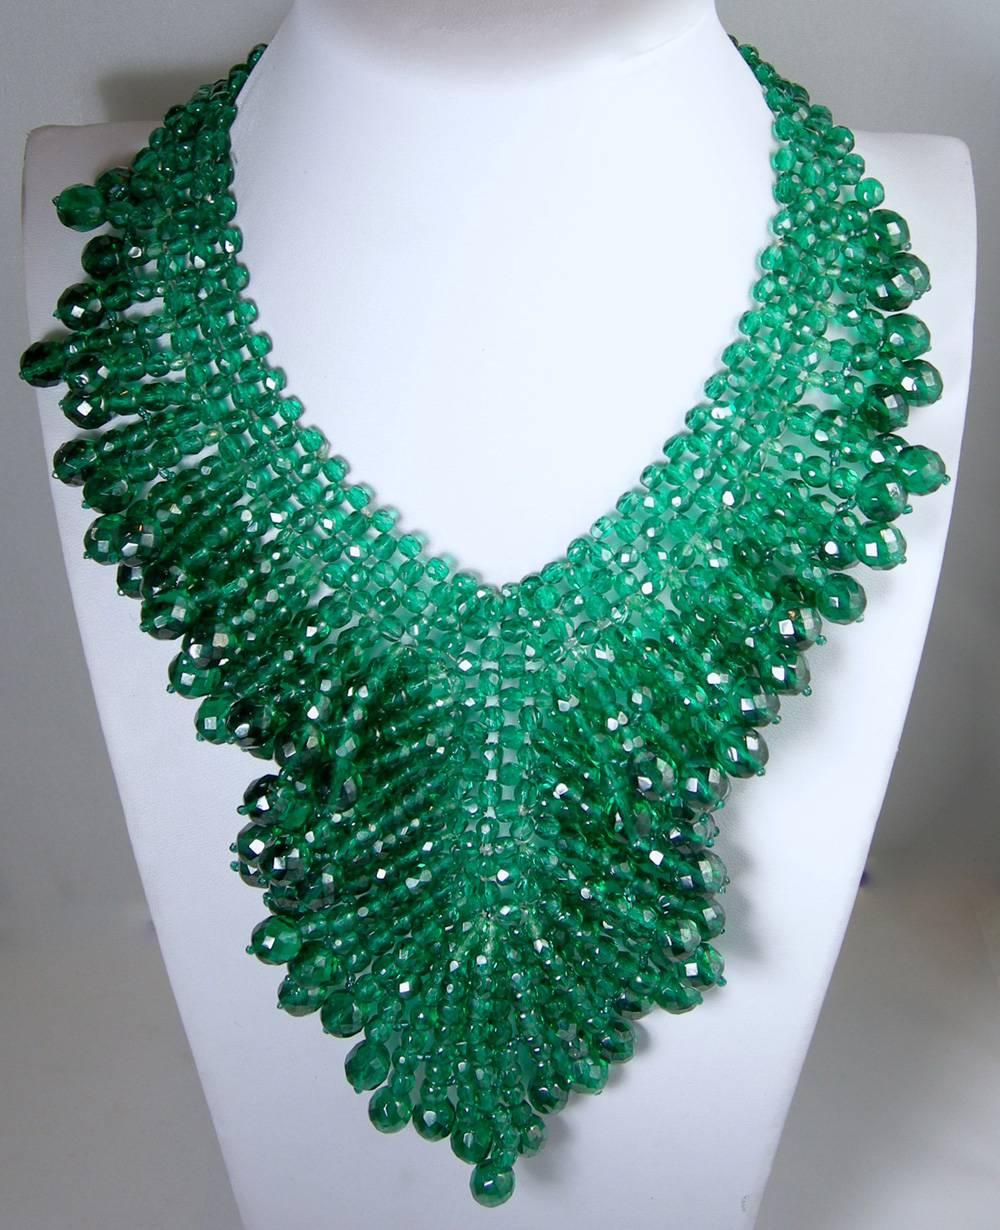 I love Coppola e Toppo and this design is unique and rare to find  This necklace has sparkling, bezel cut green glass beads in a gold-tone setting.  This necklace measures 17 1/2” with a hook closure; the front drop is 5 1/2” x 4” wide.    It is